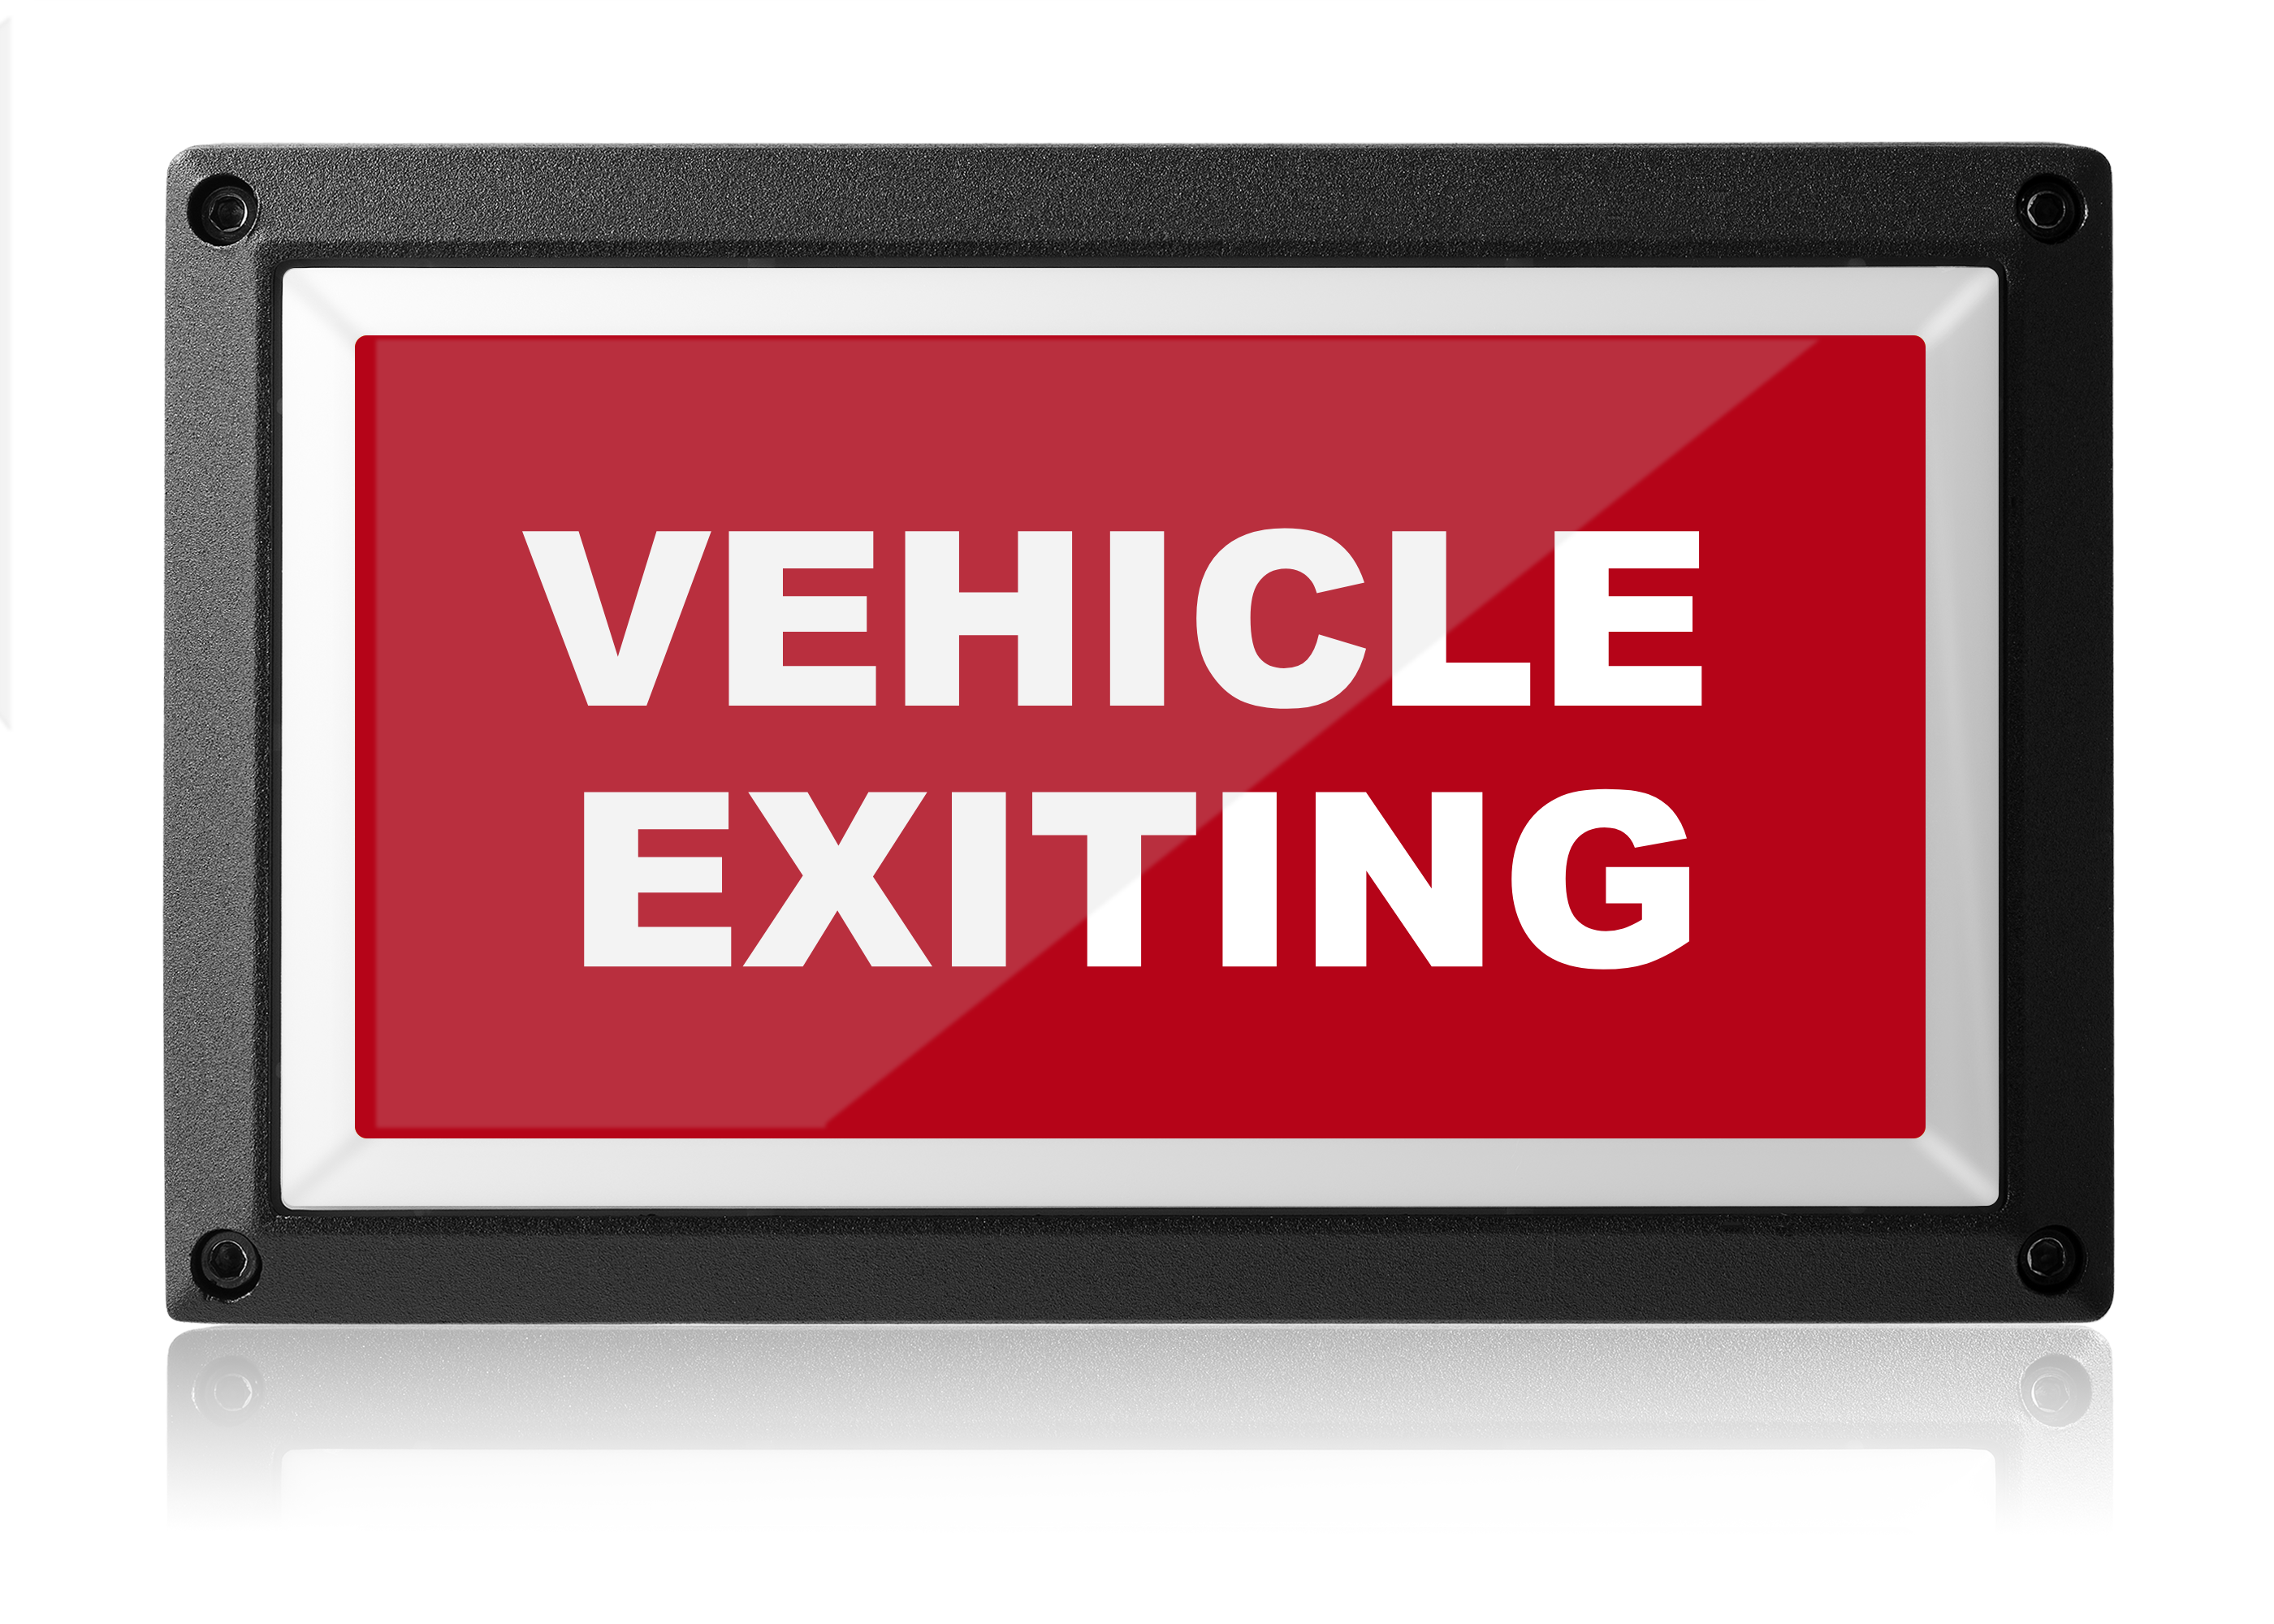 Vehicle Existing LED Warning Sign - High Visibility, IP55 Rated, Indoor/Outdoor Safety Light-